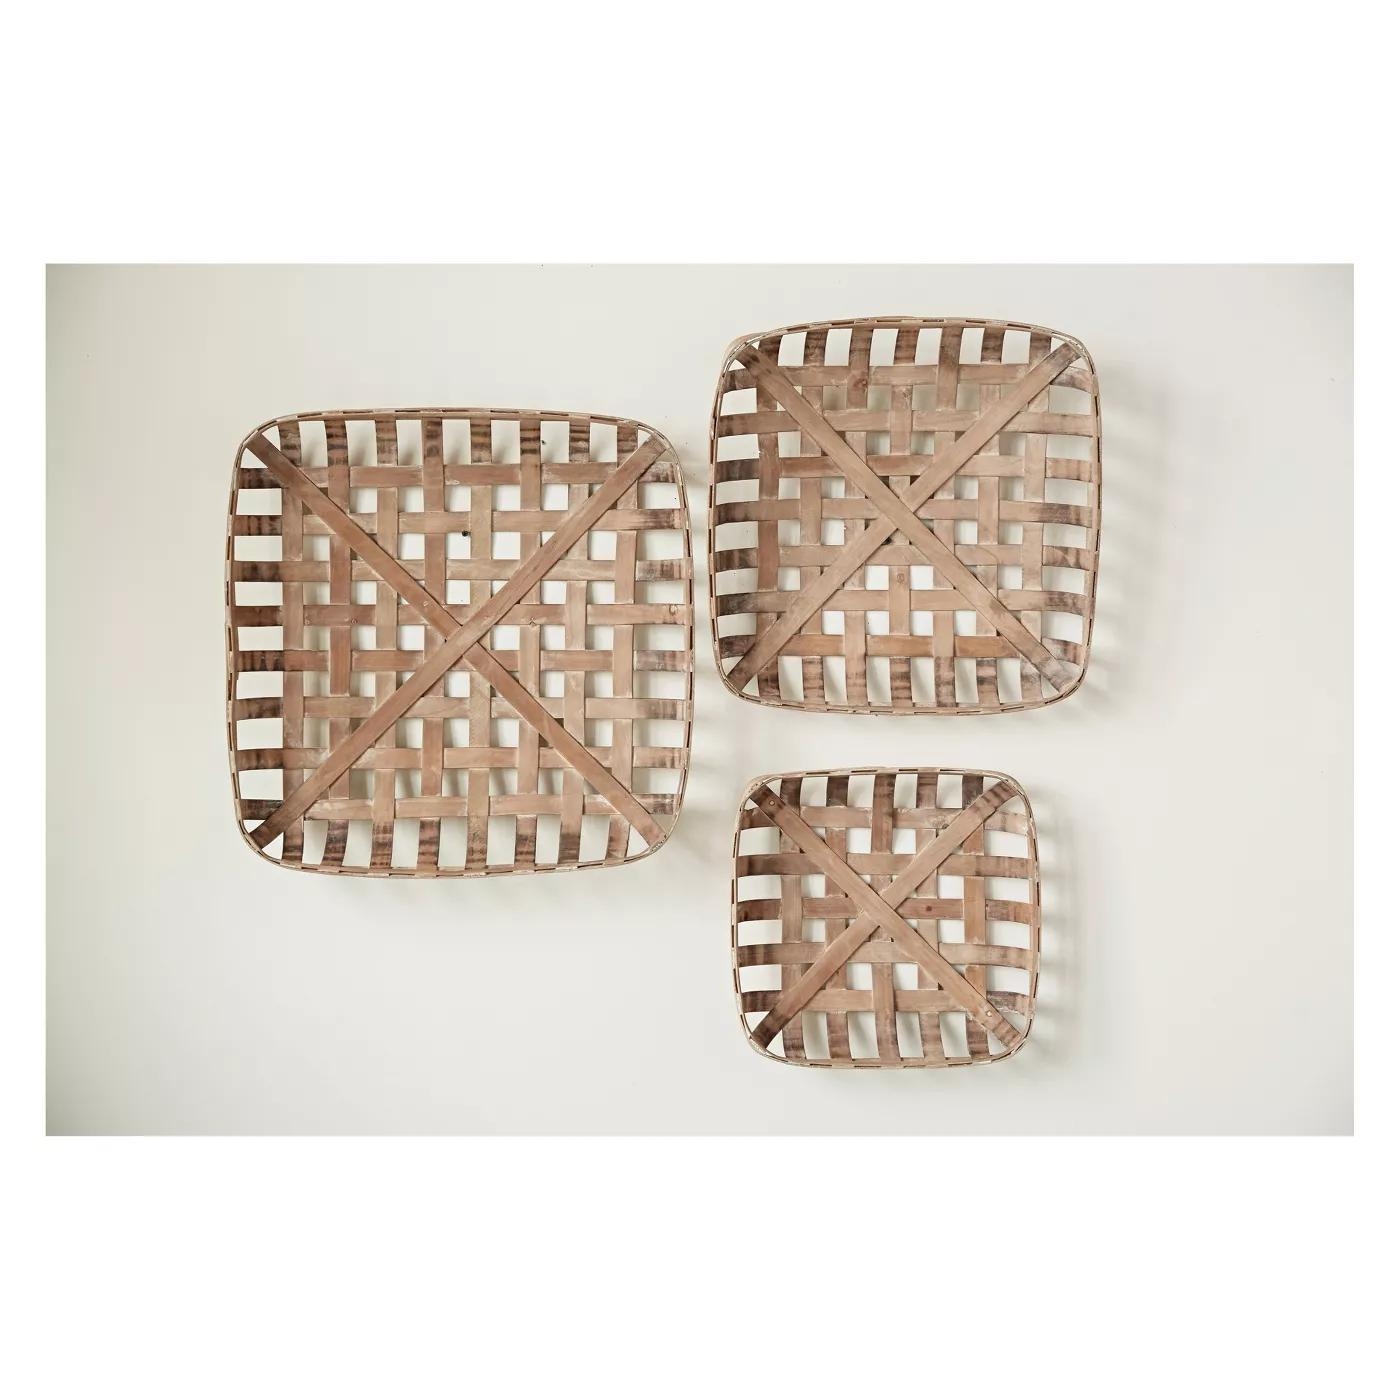 Set of 3 Square Reproduction Tobacco  Baskets - Image 1